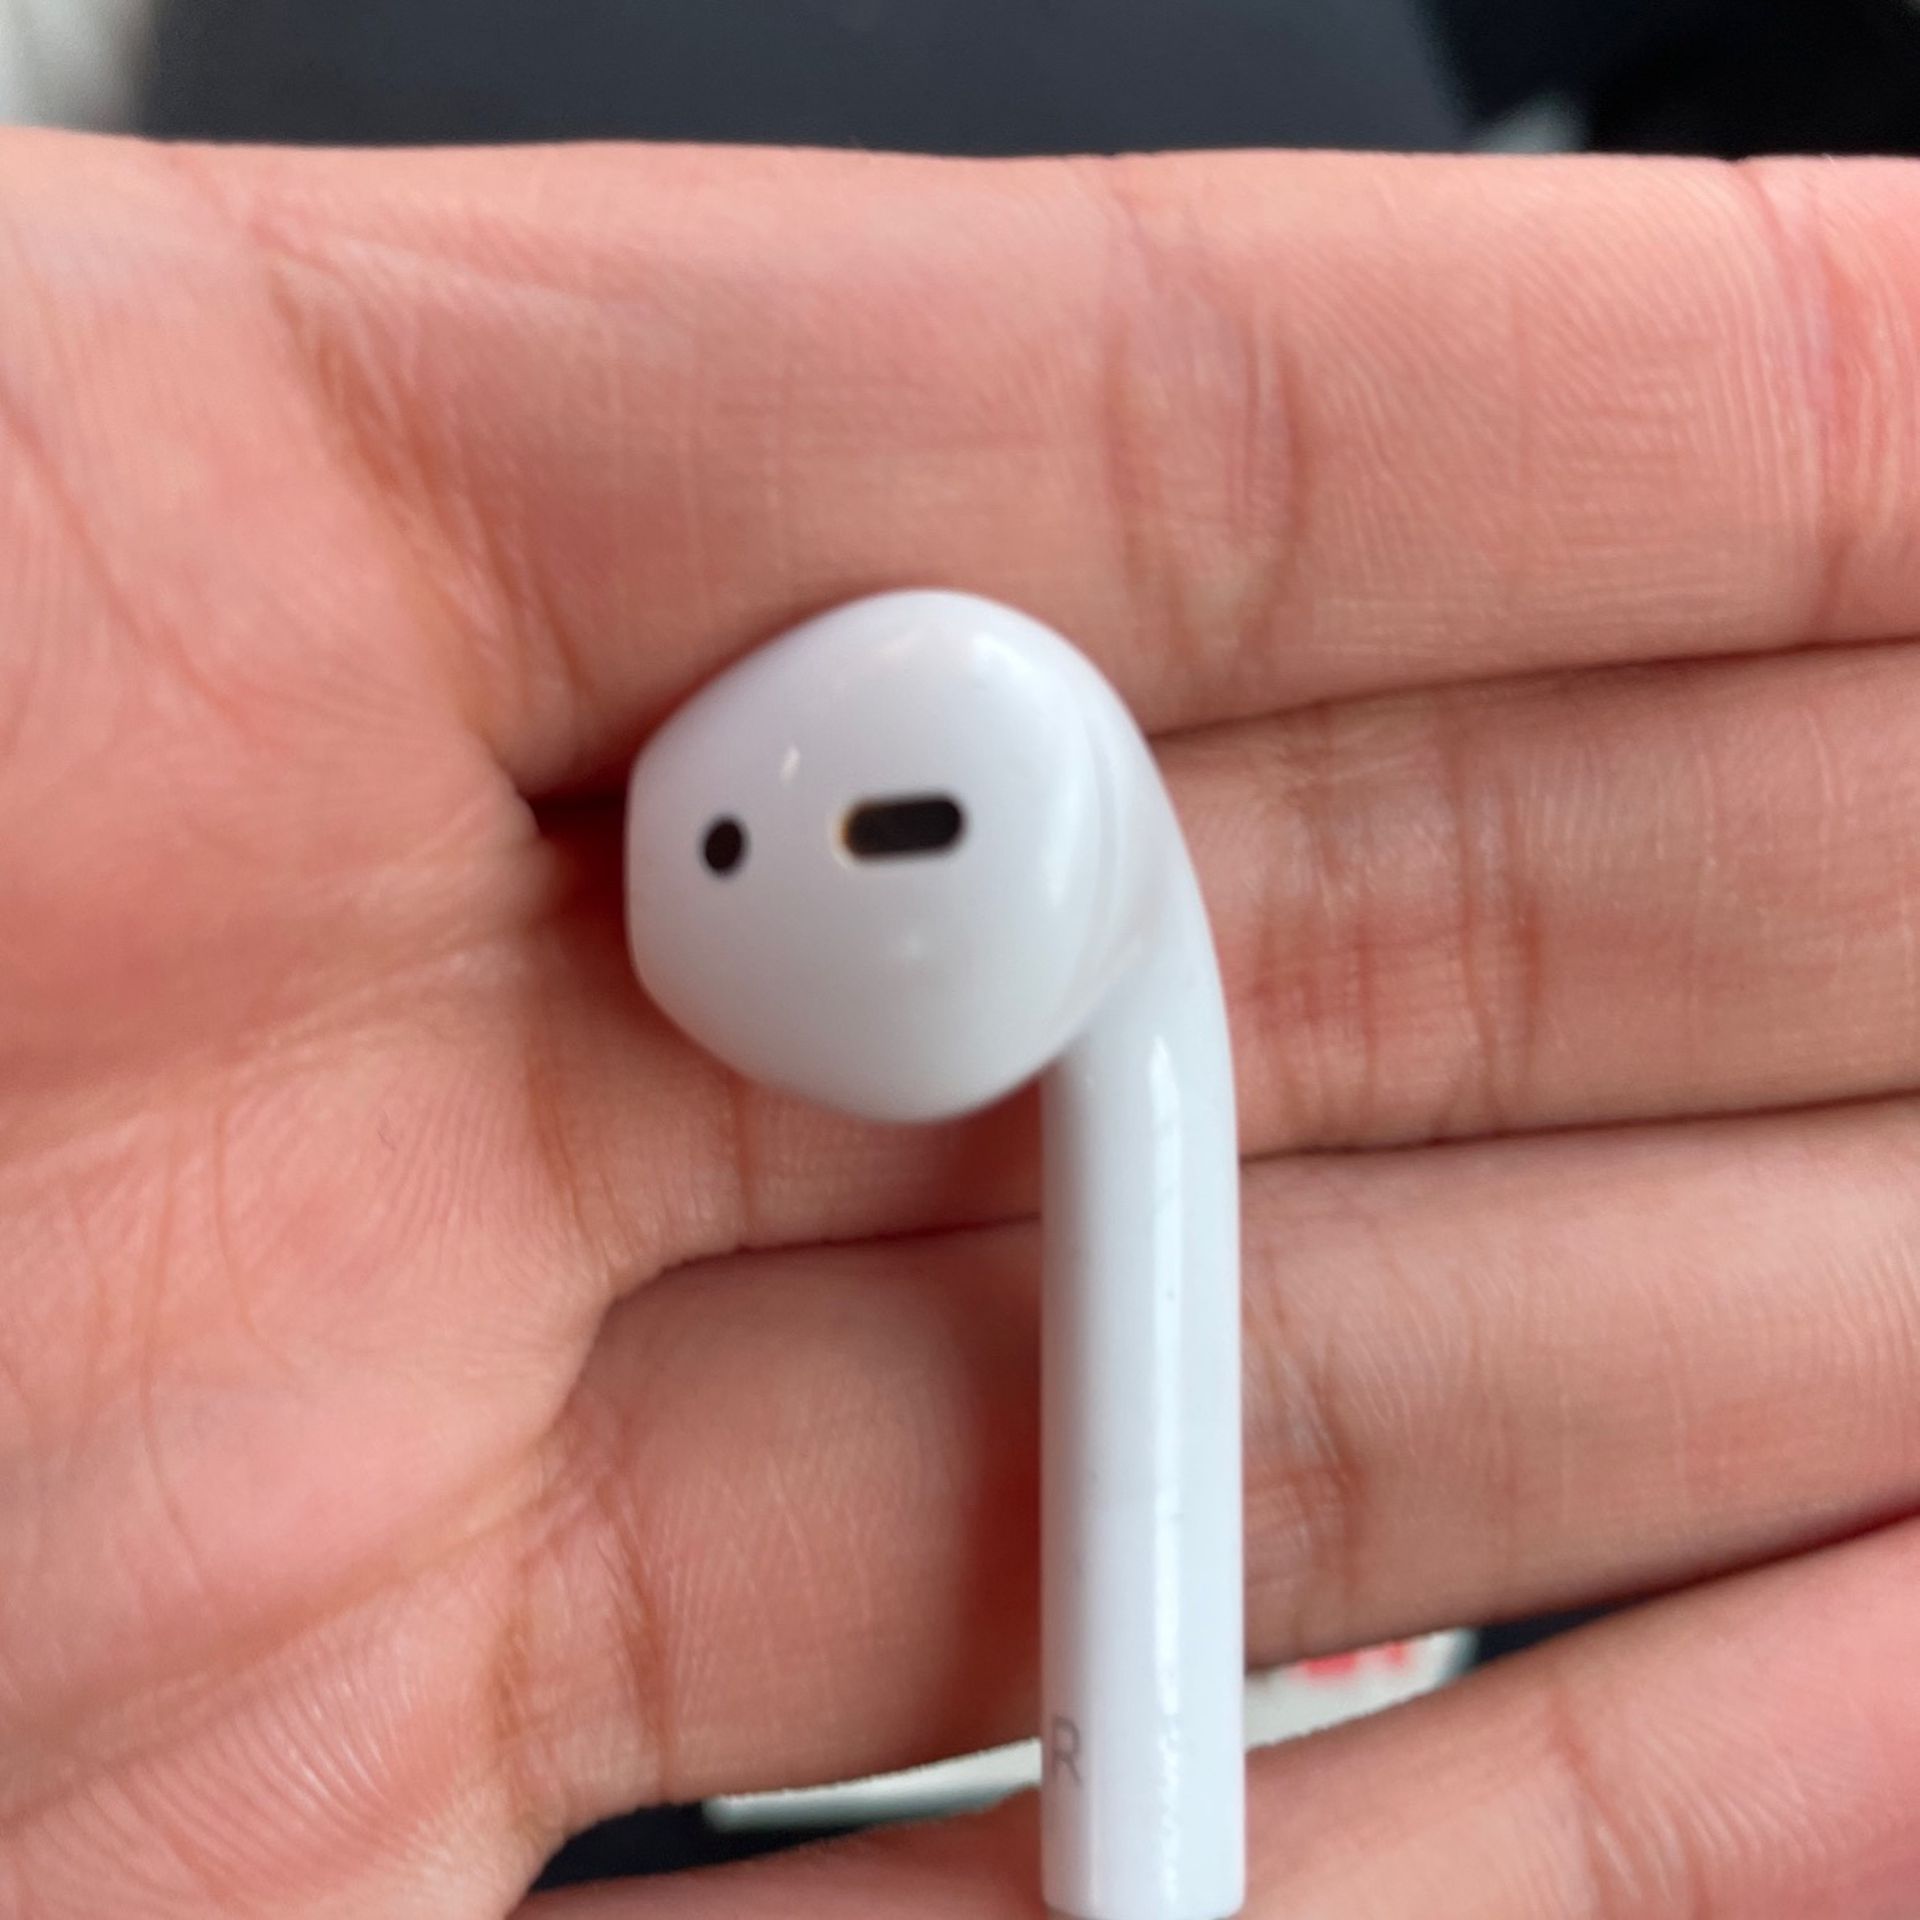 RIGHT AIR POD (Replacement Air Pod)